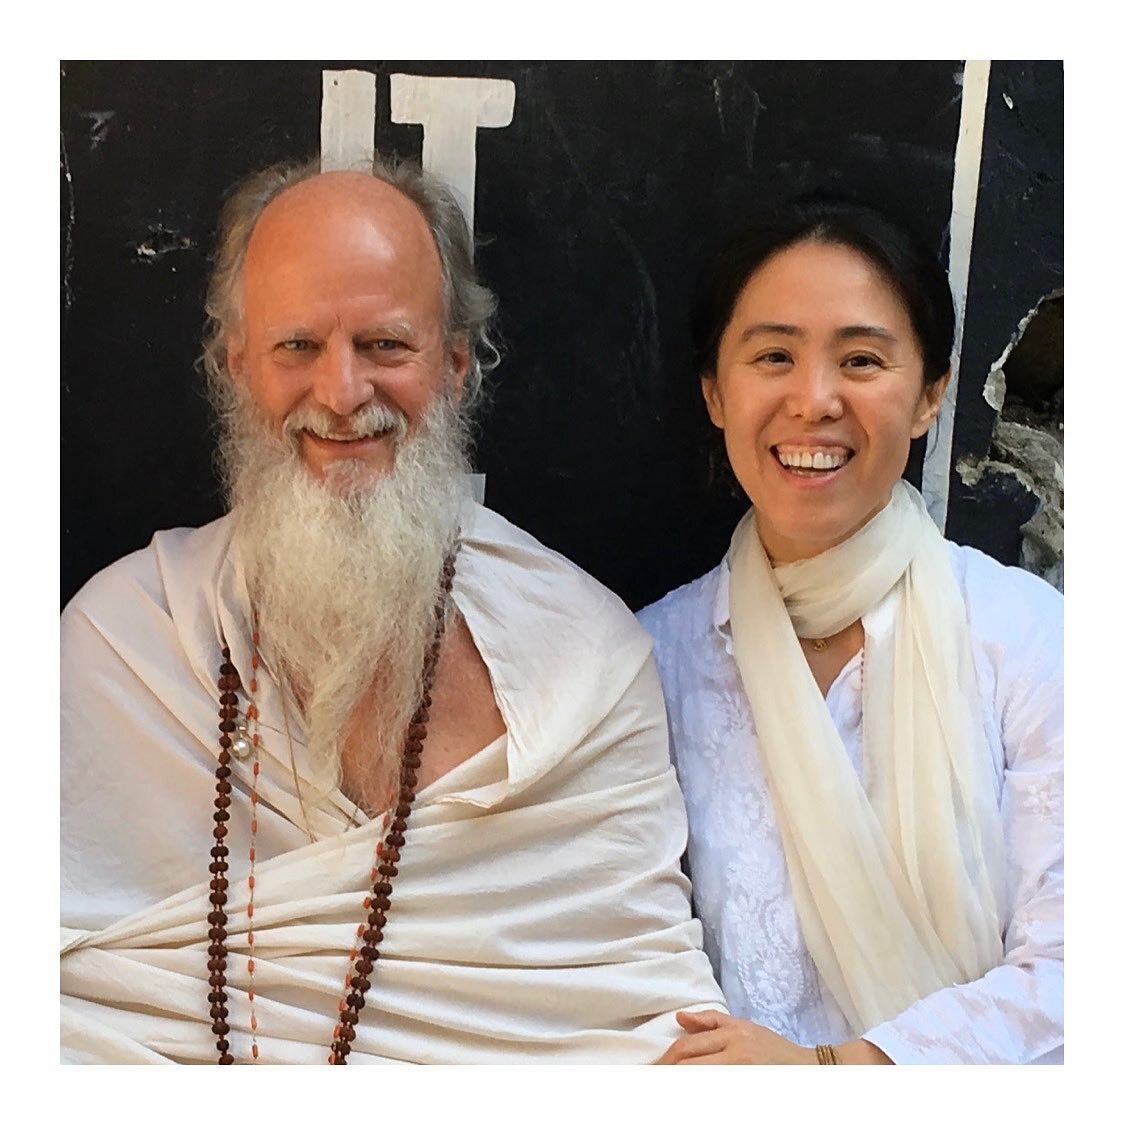 I studied under Maharishi Vyasananda Saraswati (Thom Knoles), a pre-eminent master-teacher of this Vedic Meditation technique. Over 12 weeks in the foothills of Himalayas, Rishikesh, he trained me in the original method taught by his teacher Maharish